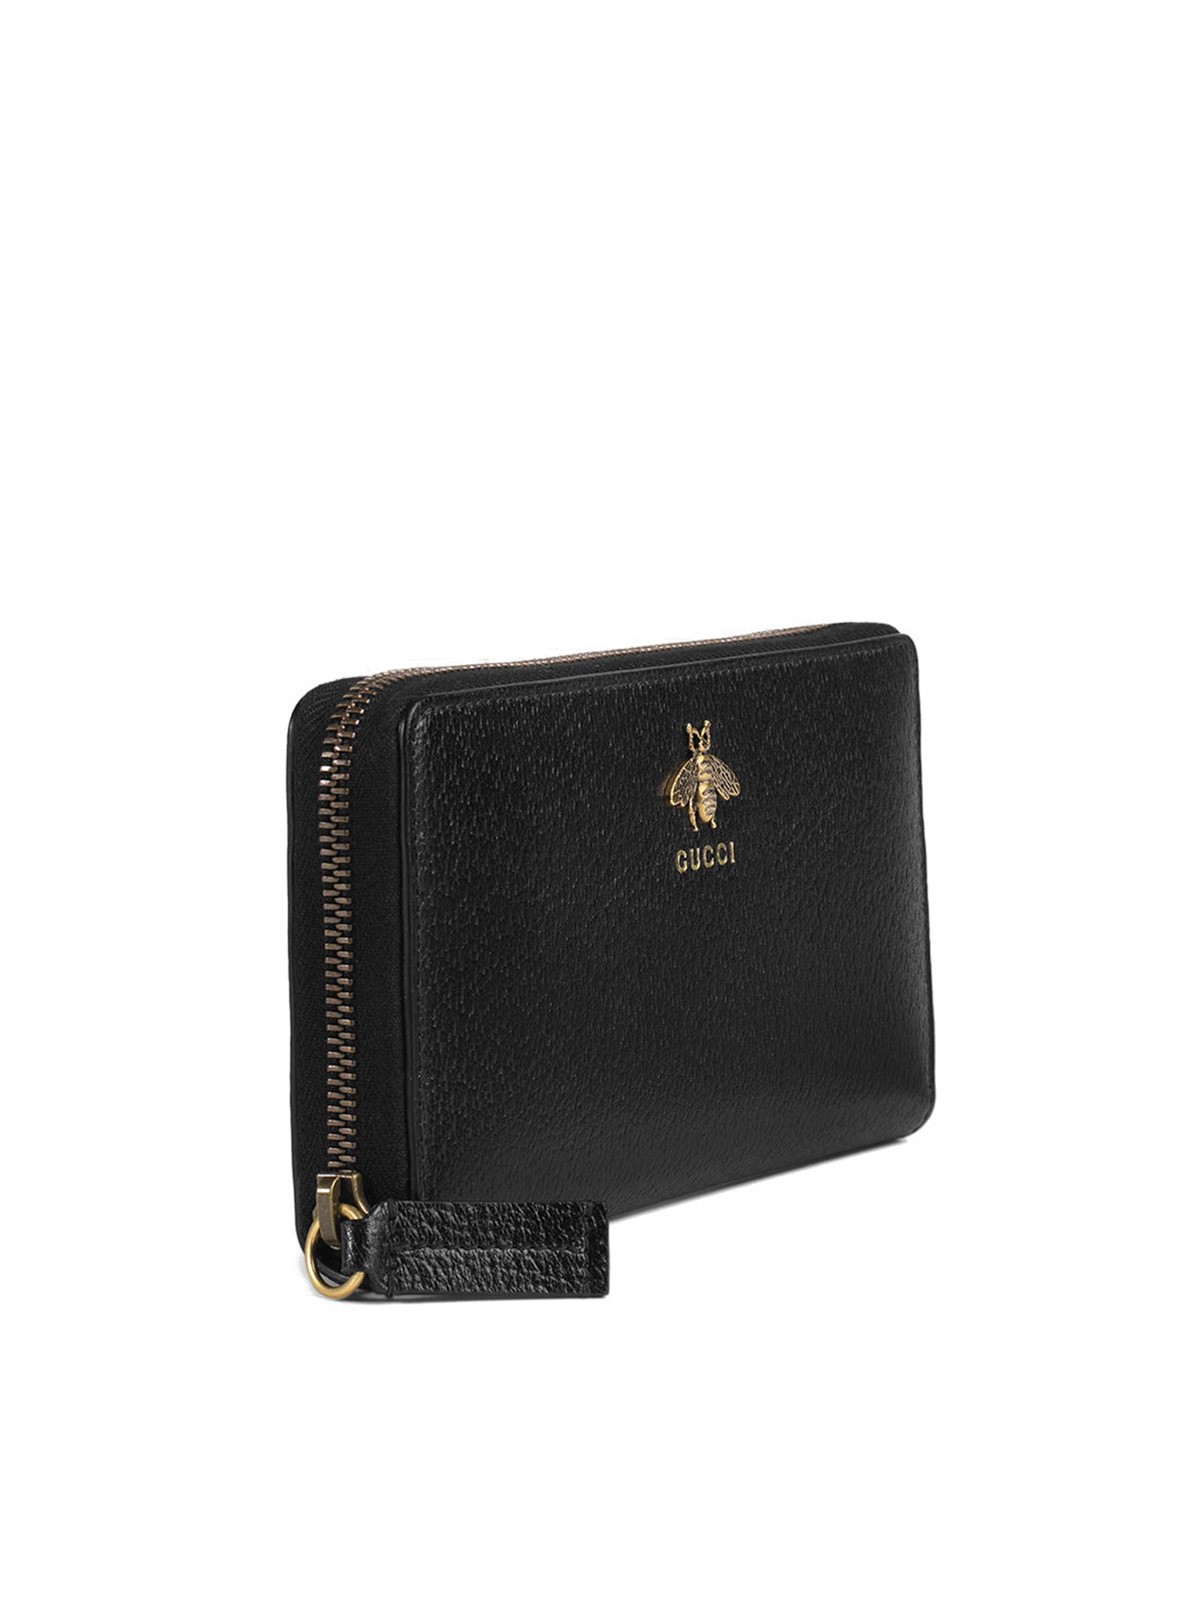 gucci BEE LOGO ZIP WALLET available on www.semadata.org - 22782